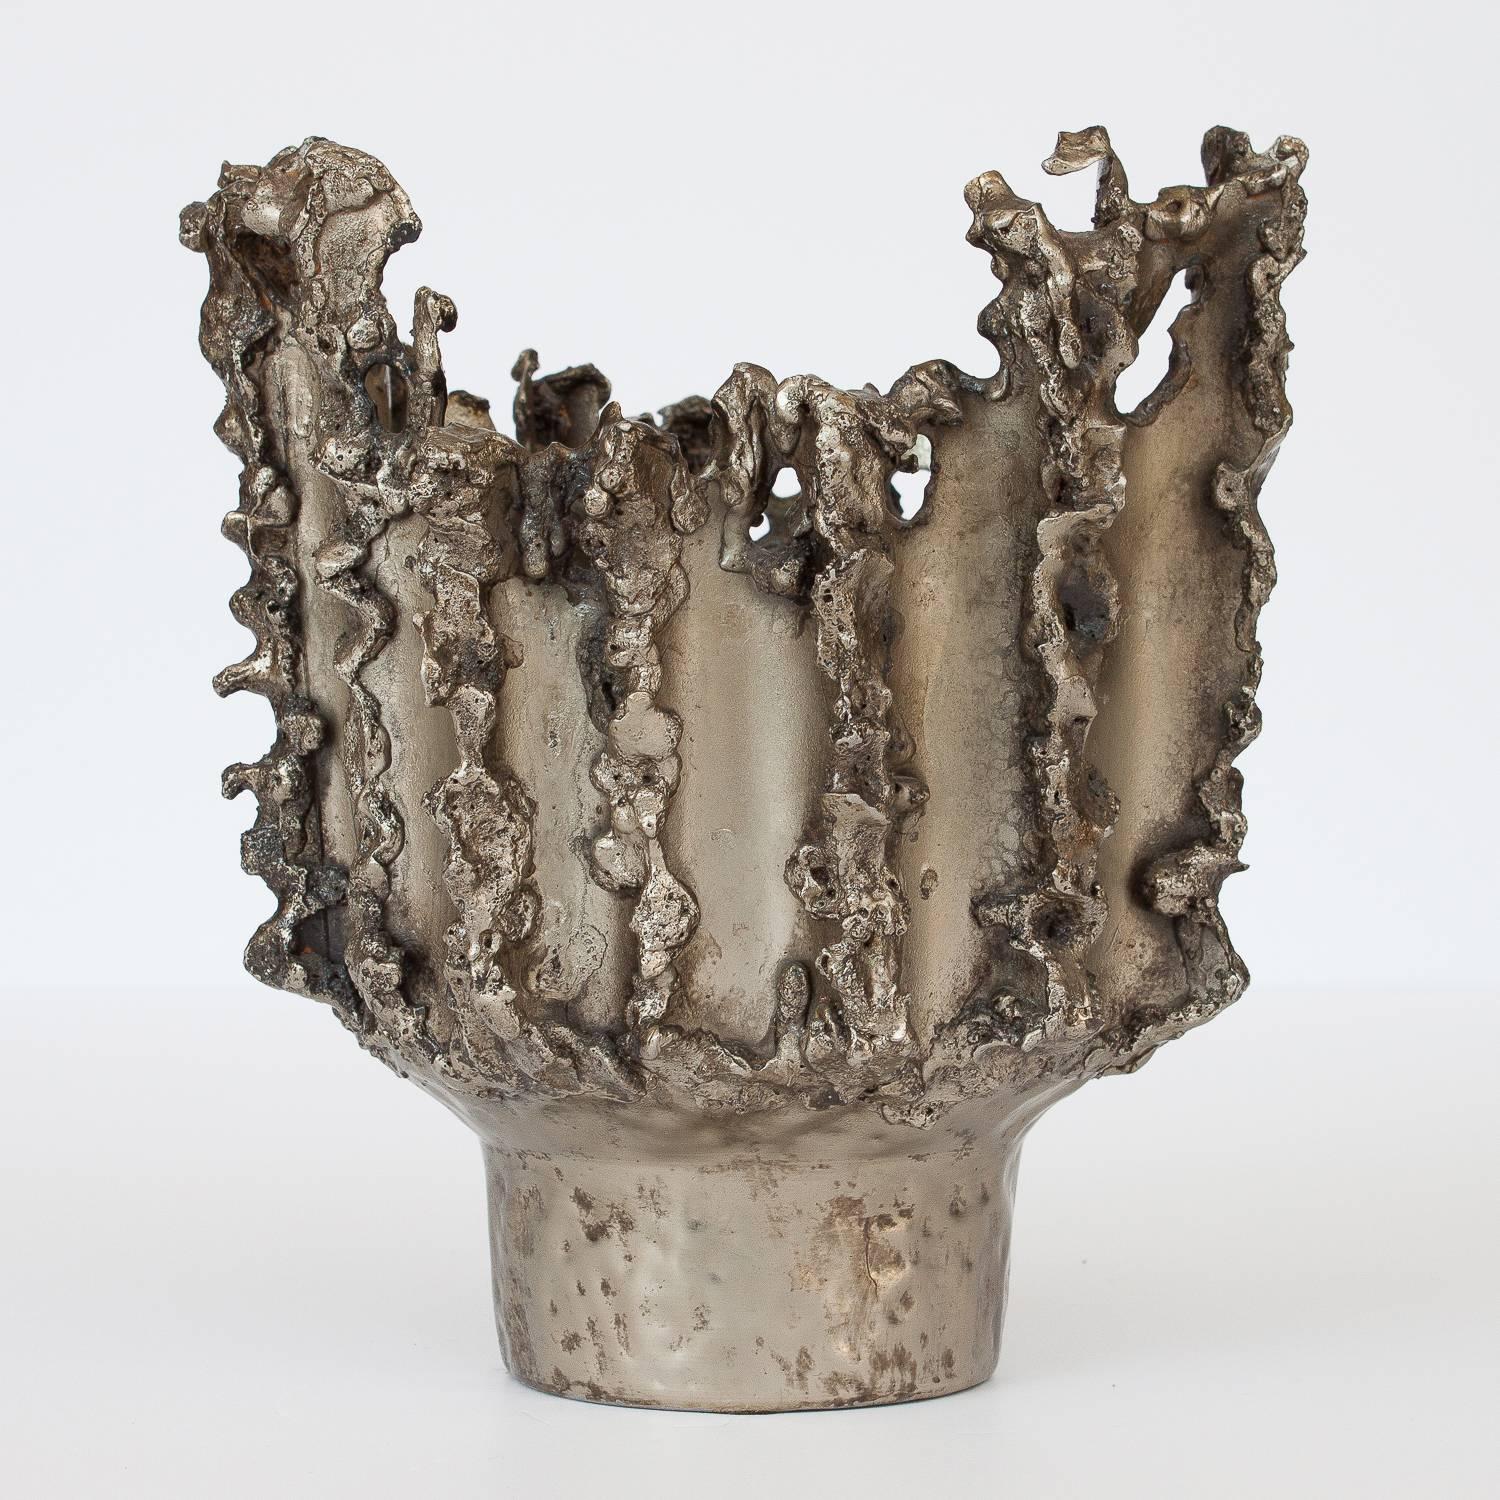 Outstanding Brutalist metal vase by Marcello Fantoni. Torch cut and welded design. Stamped on bottom with 